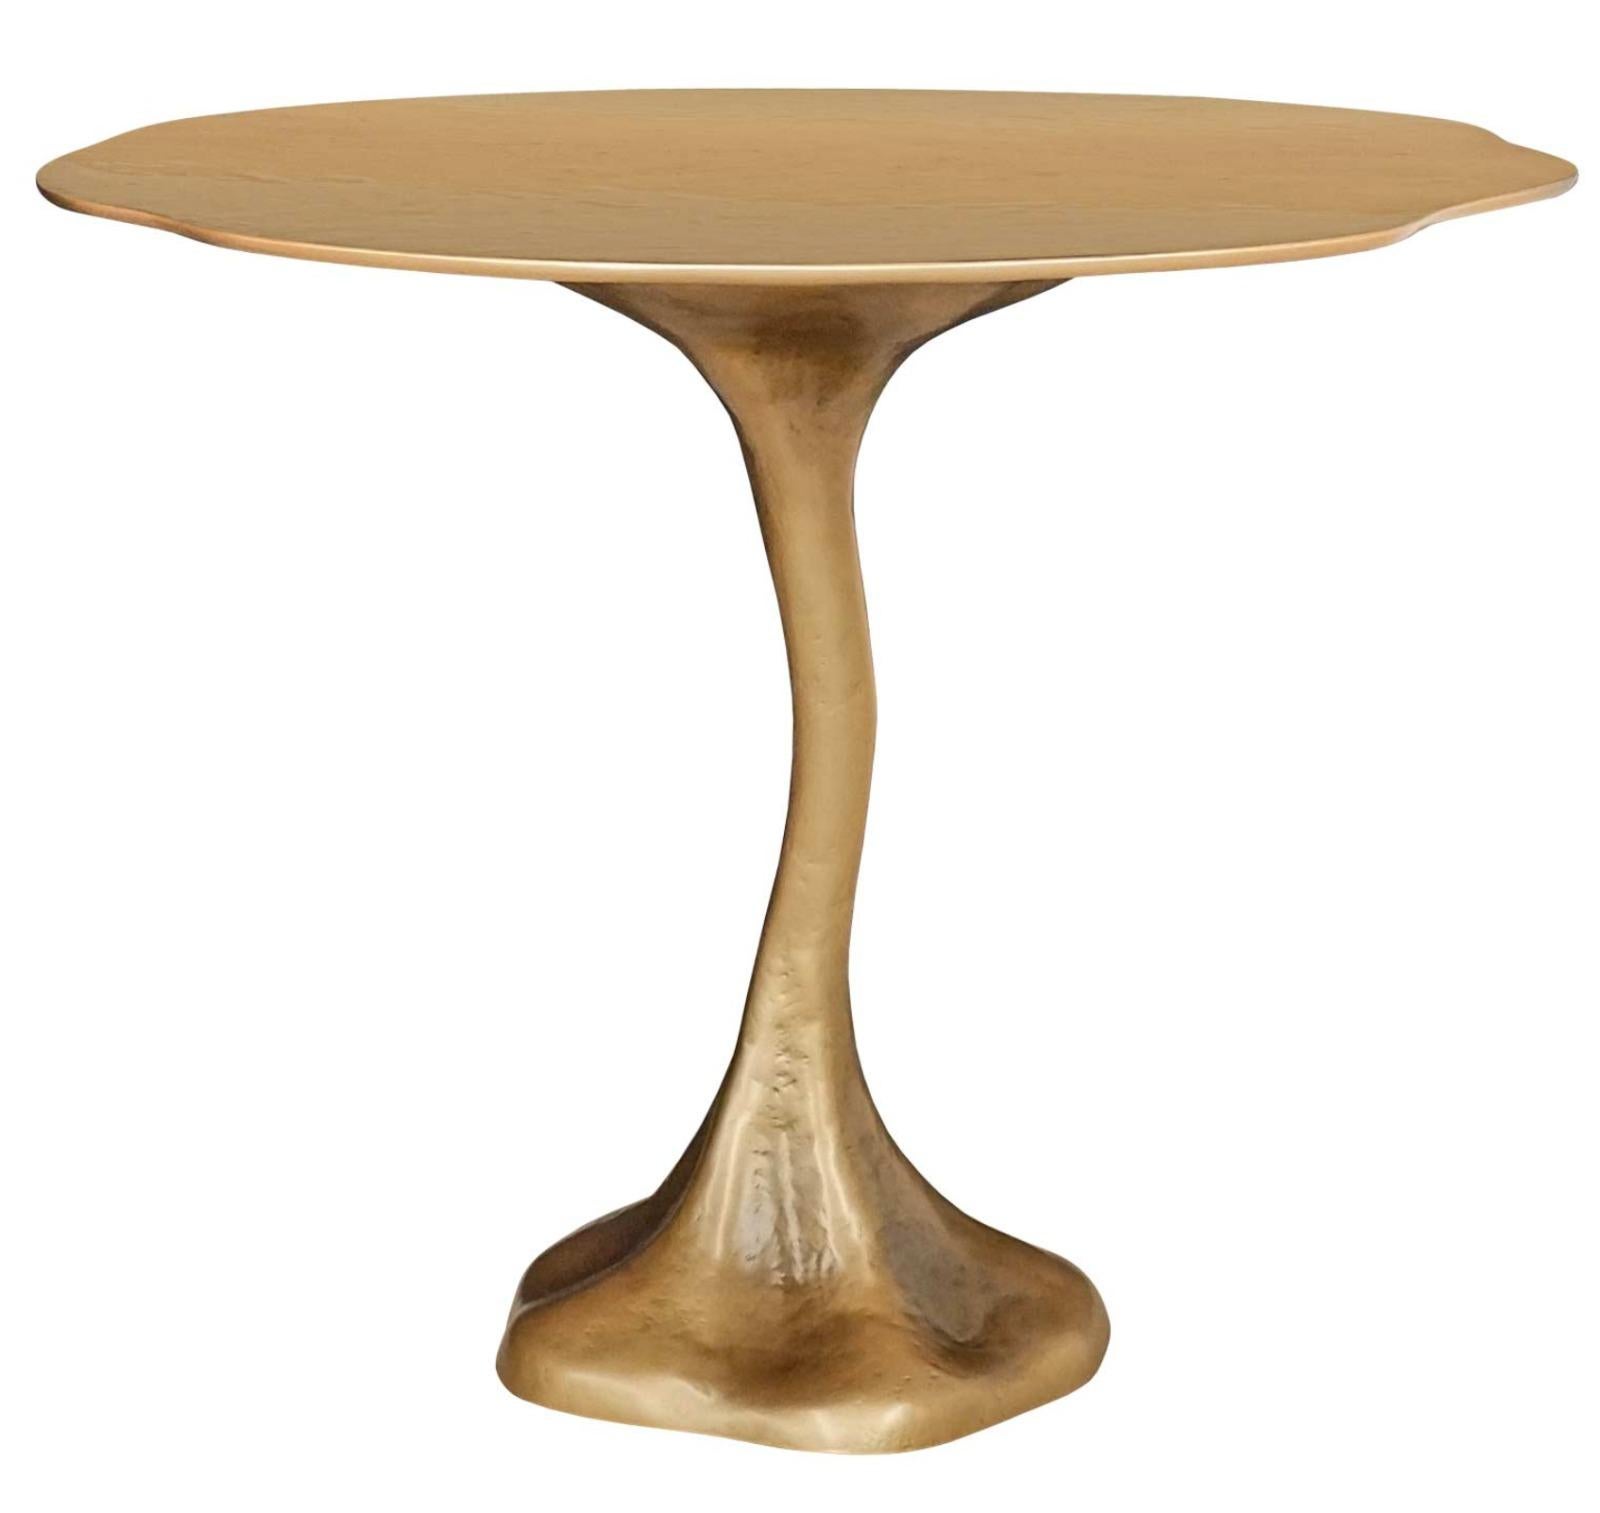 Dining table

General information
Dimensions (cm): Ø100 x 75
Dimensions (in): Ø39.4 x 29.5
Weight (kg): 30
Weight (lbs): 66.1
Seats: 4

Materials and Colors
Structure: Resin reinforced with fiberglass finished in aged pale gold color.



  